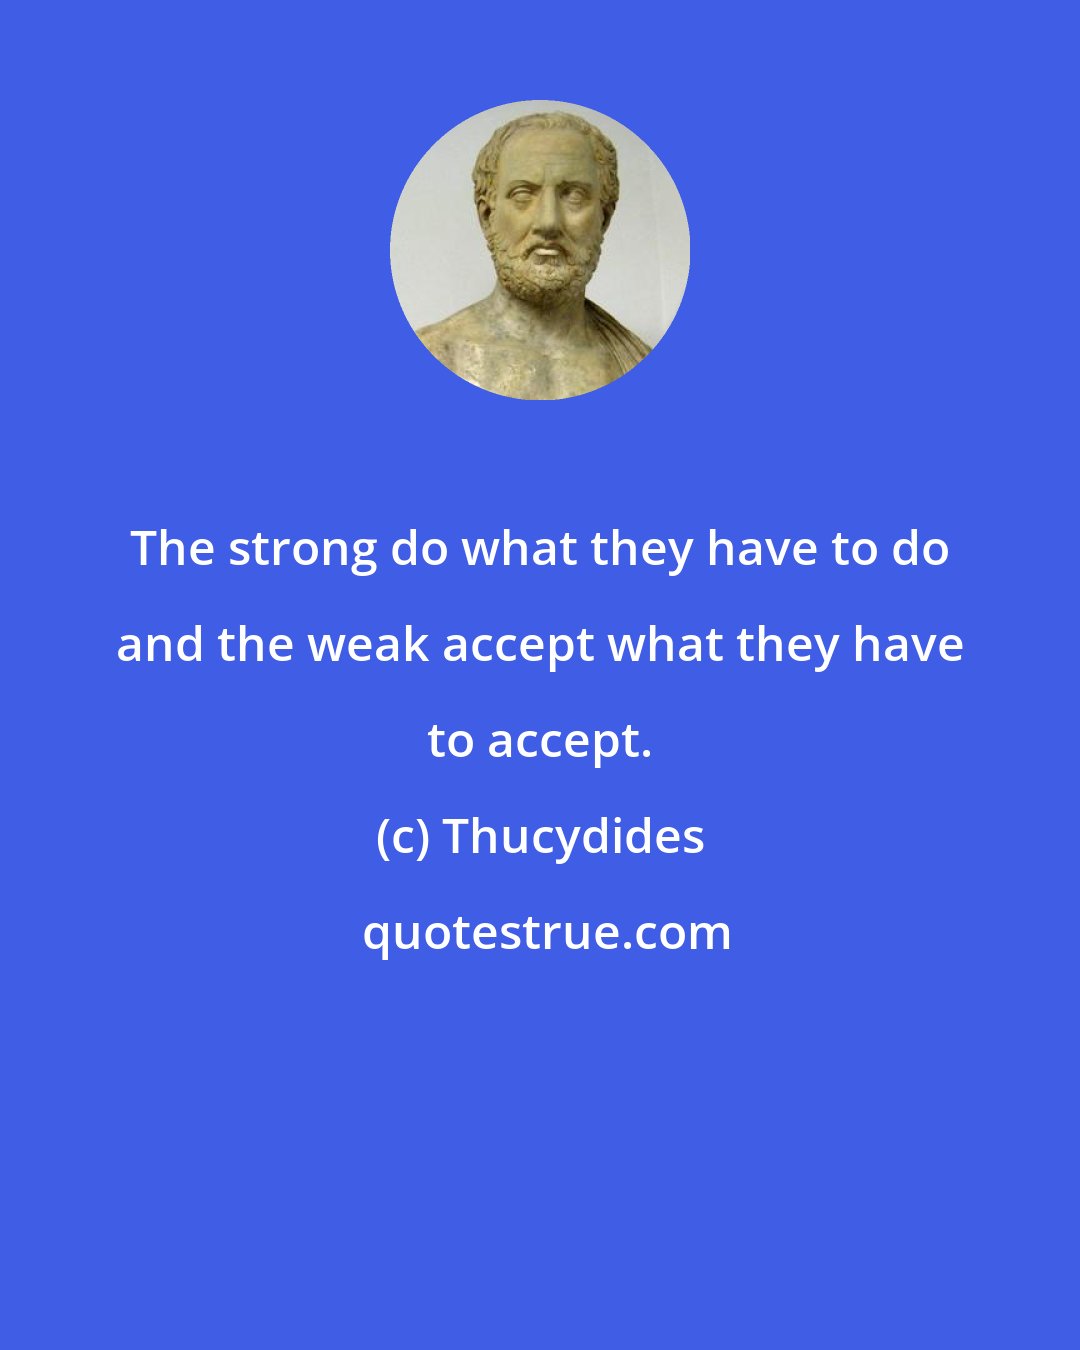 Thucydides: The strong do what they have to do and the weak accept what they have to accept.